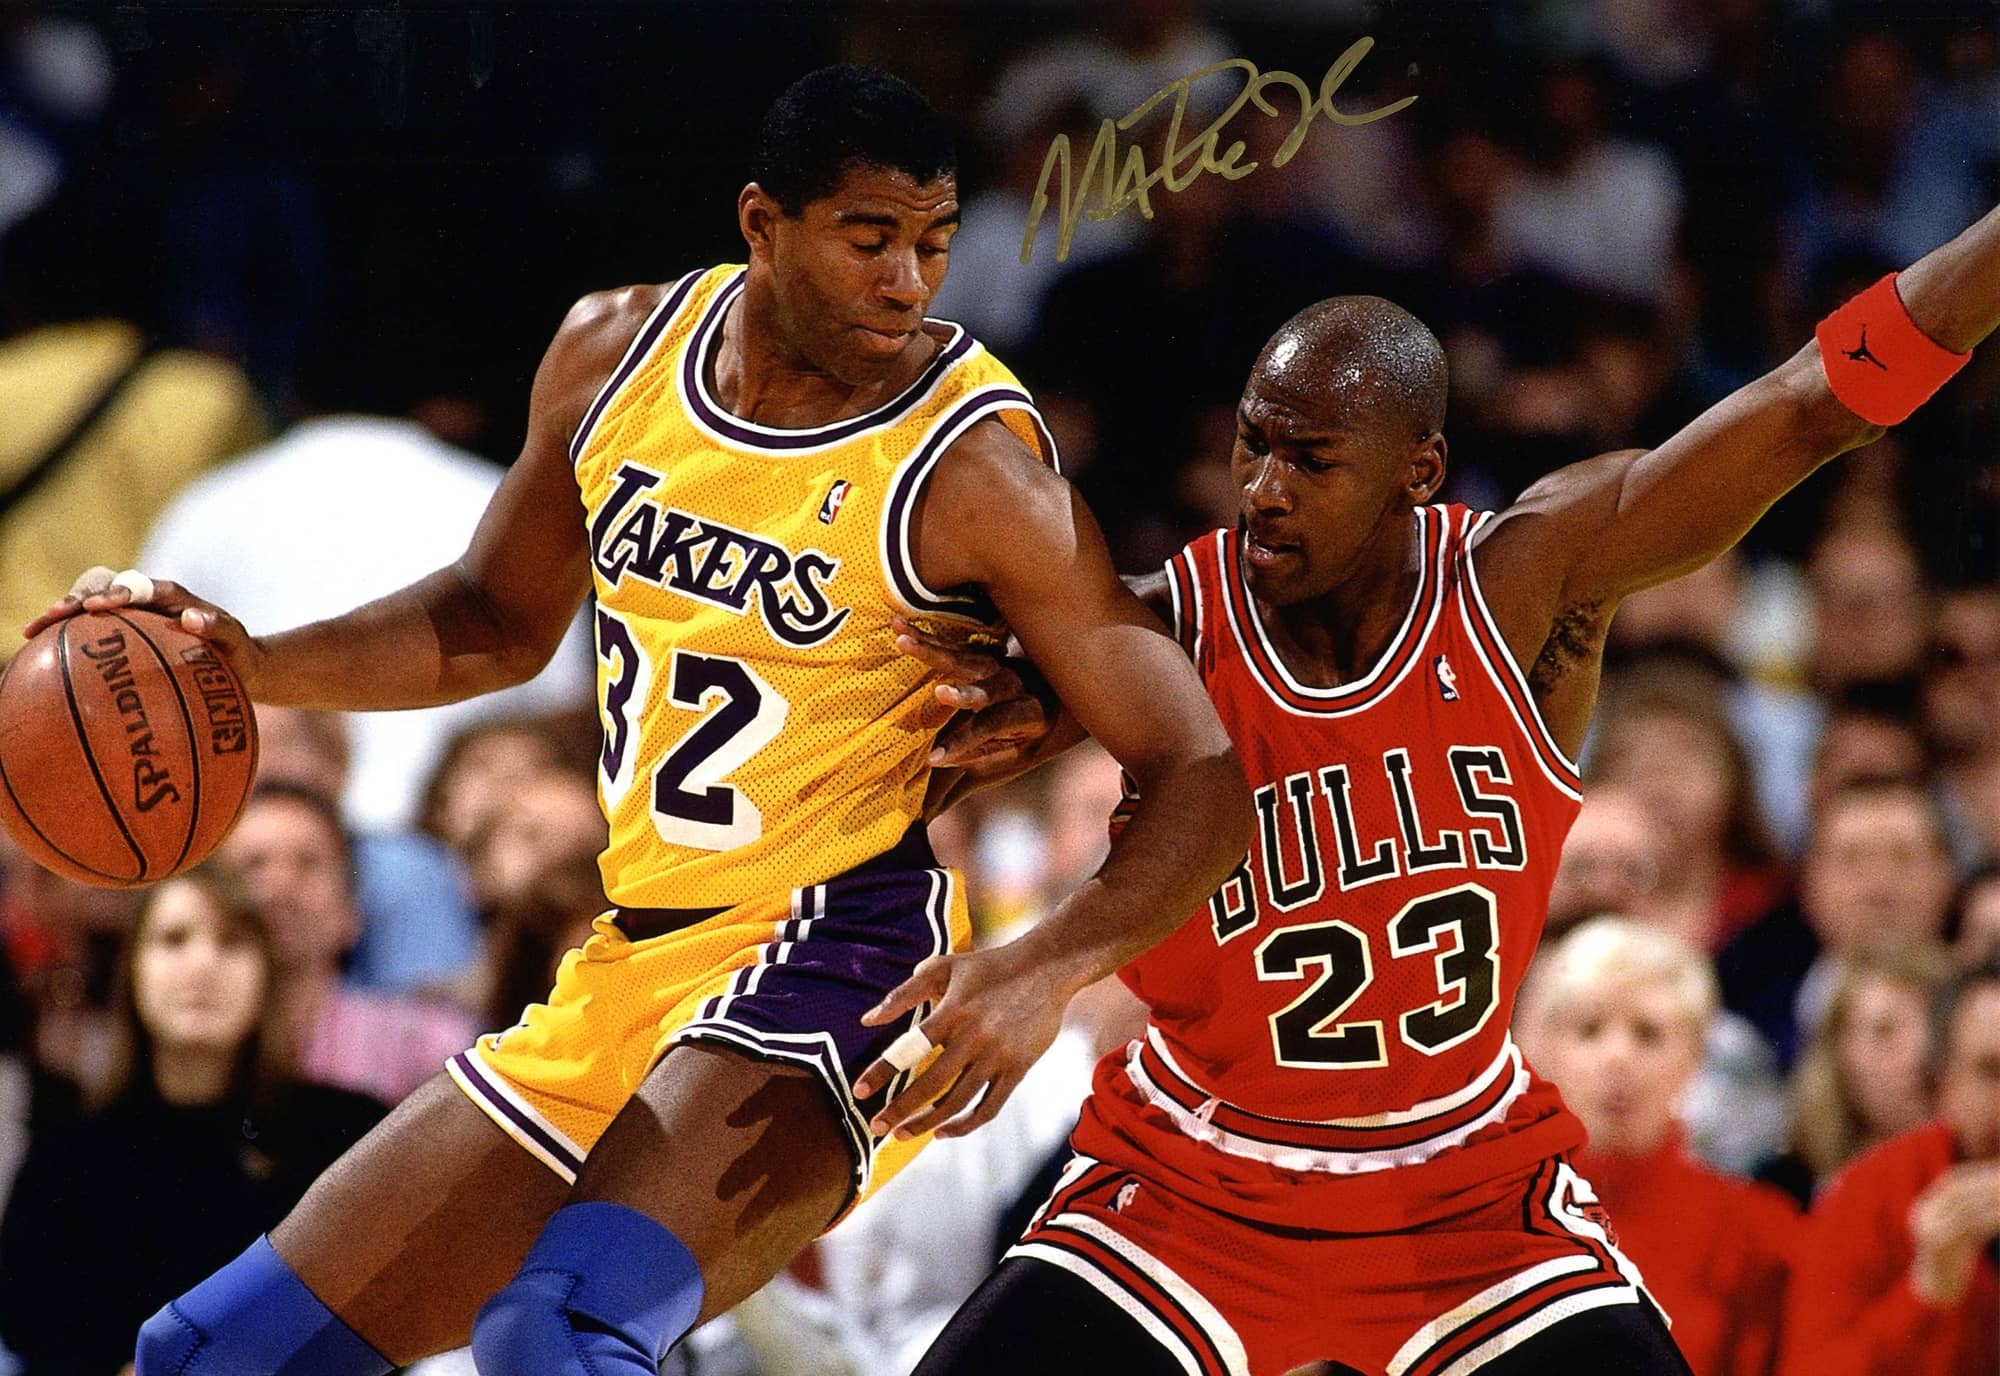 Michael-Jordan-Magic-Johnson-298kb - The Mitchell Collection of African American History